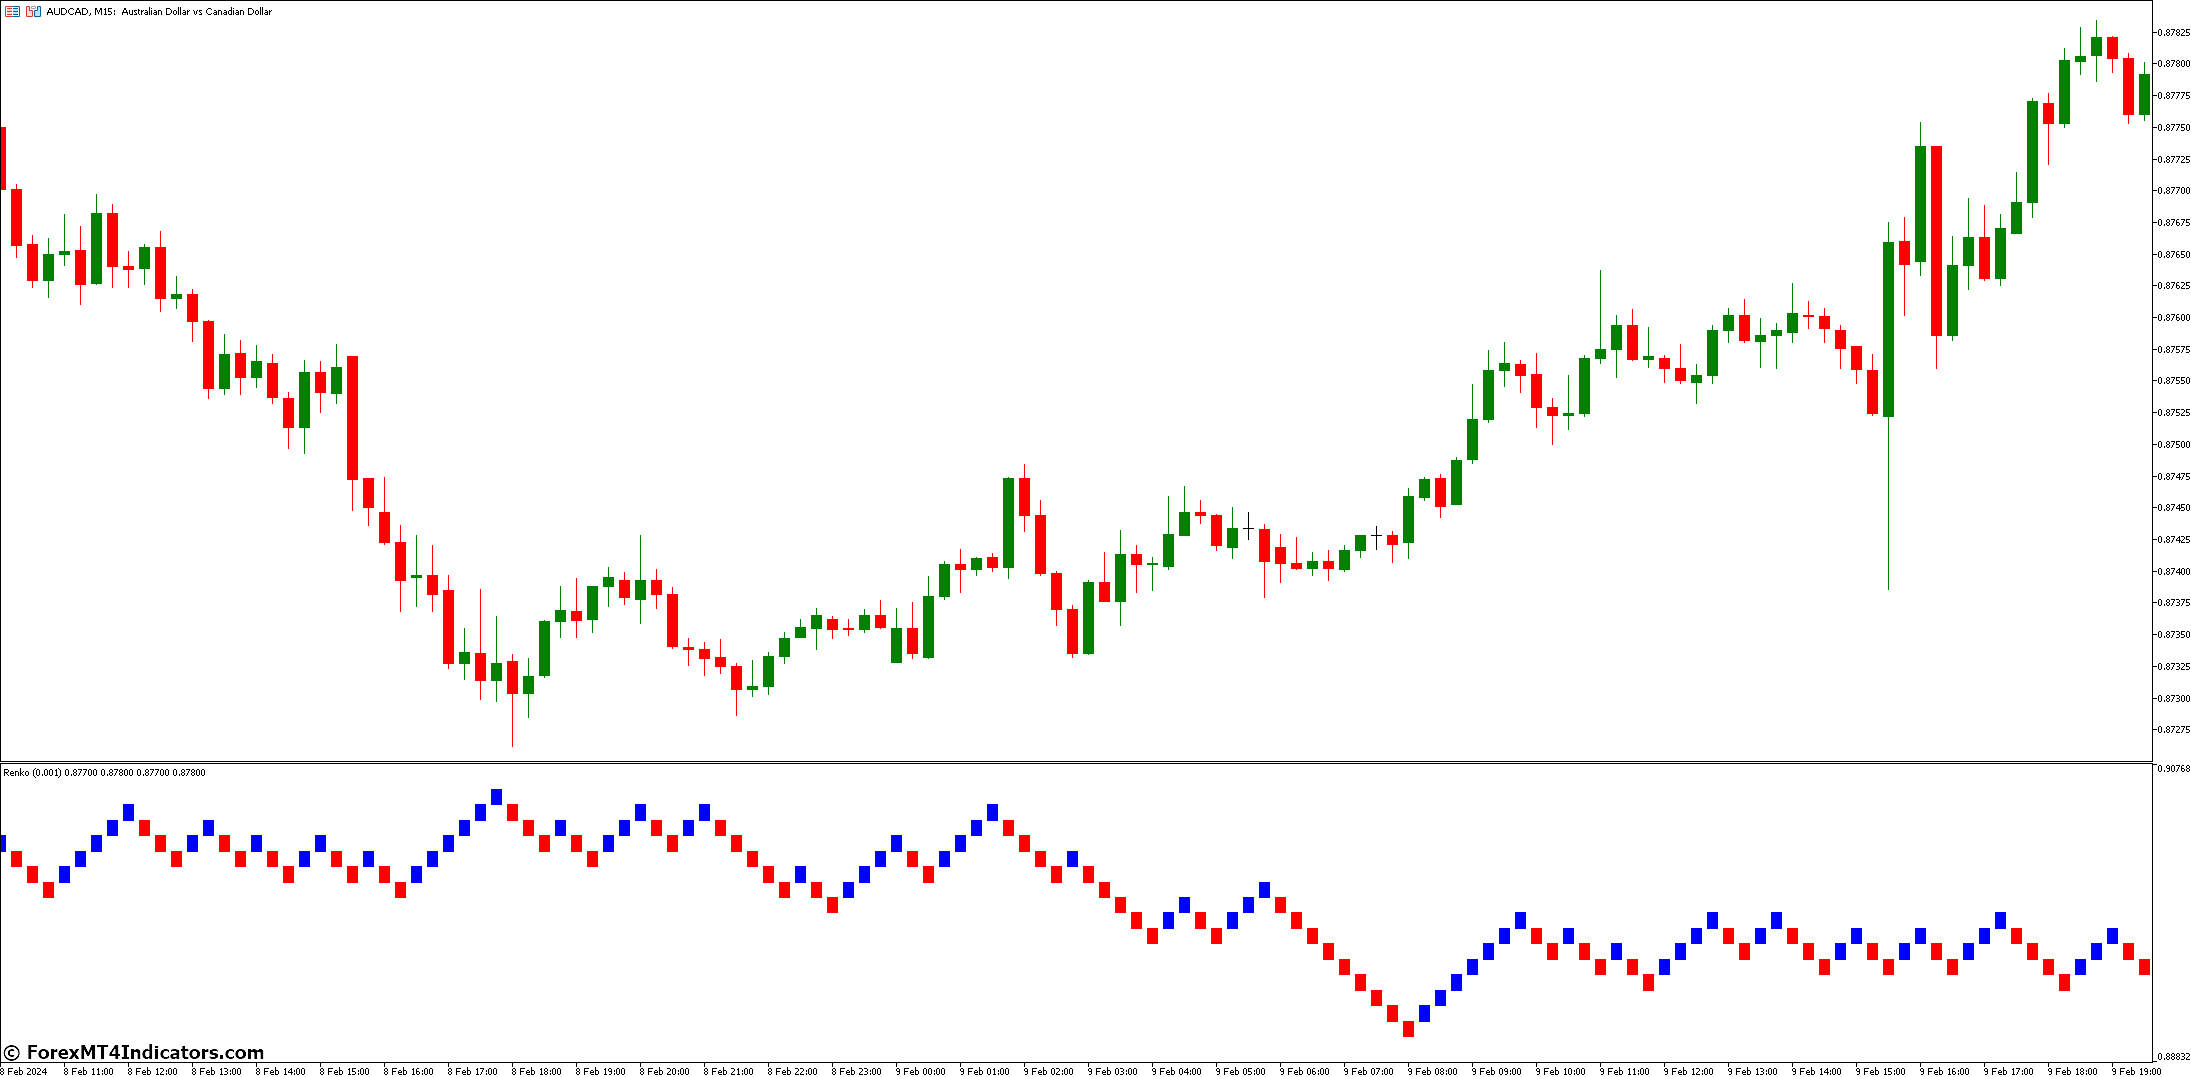 Comparison With Candlestick Charts